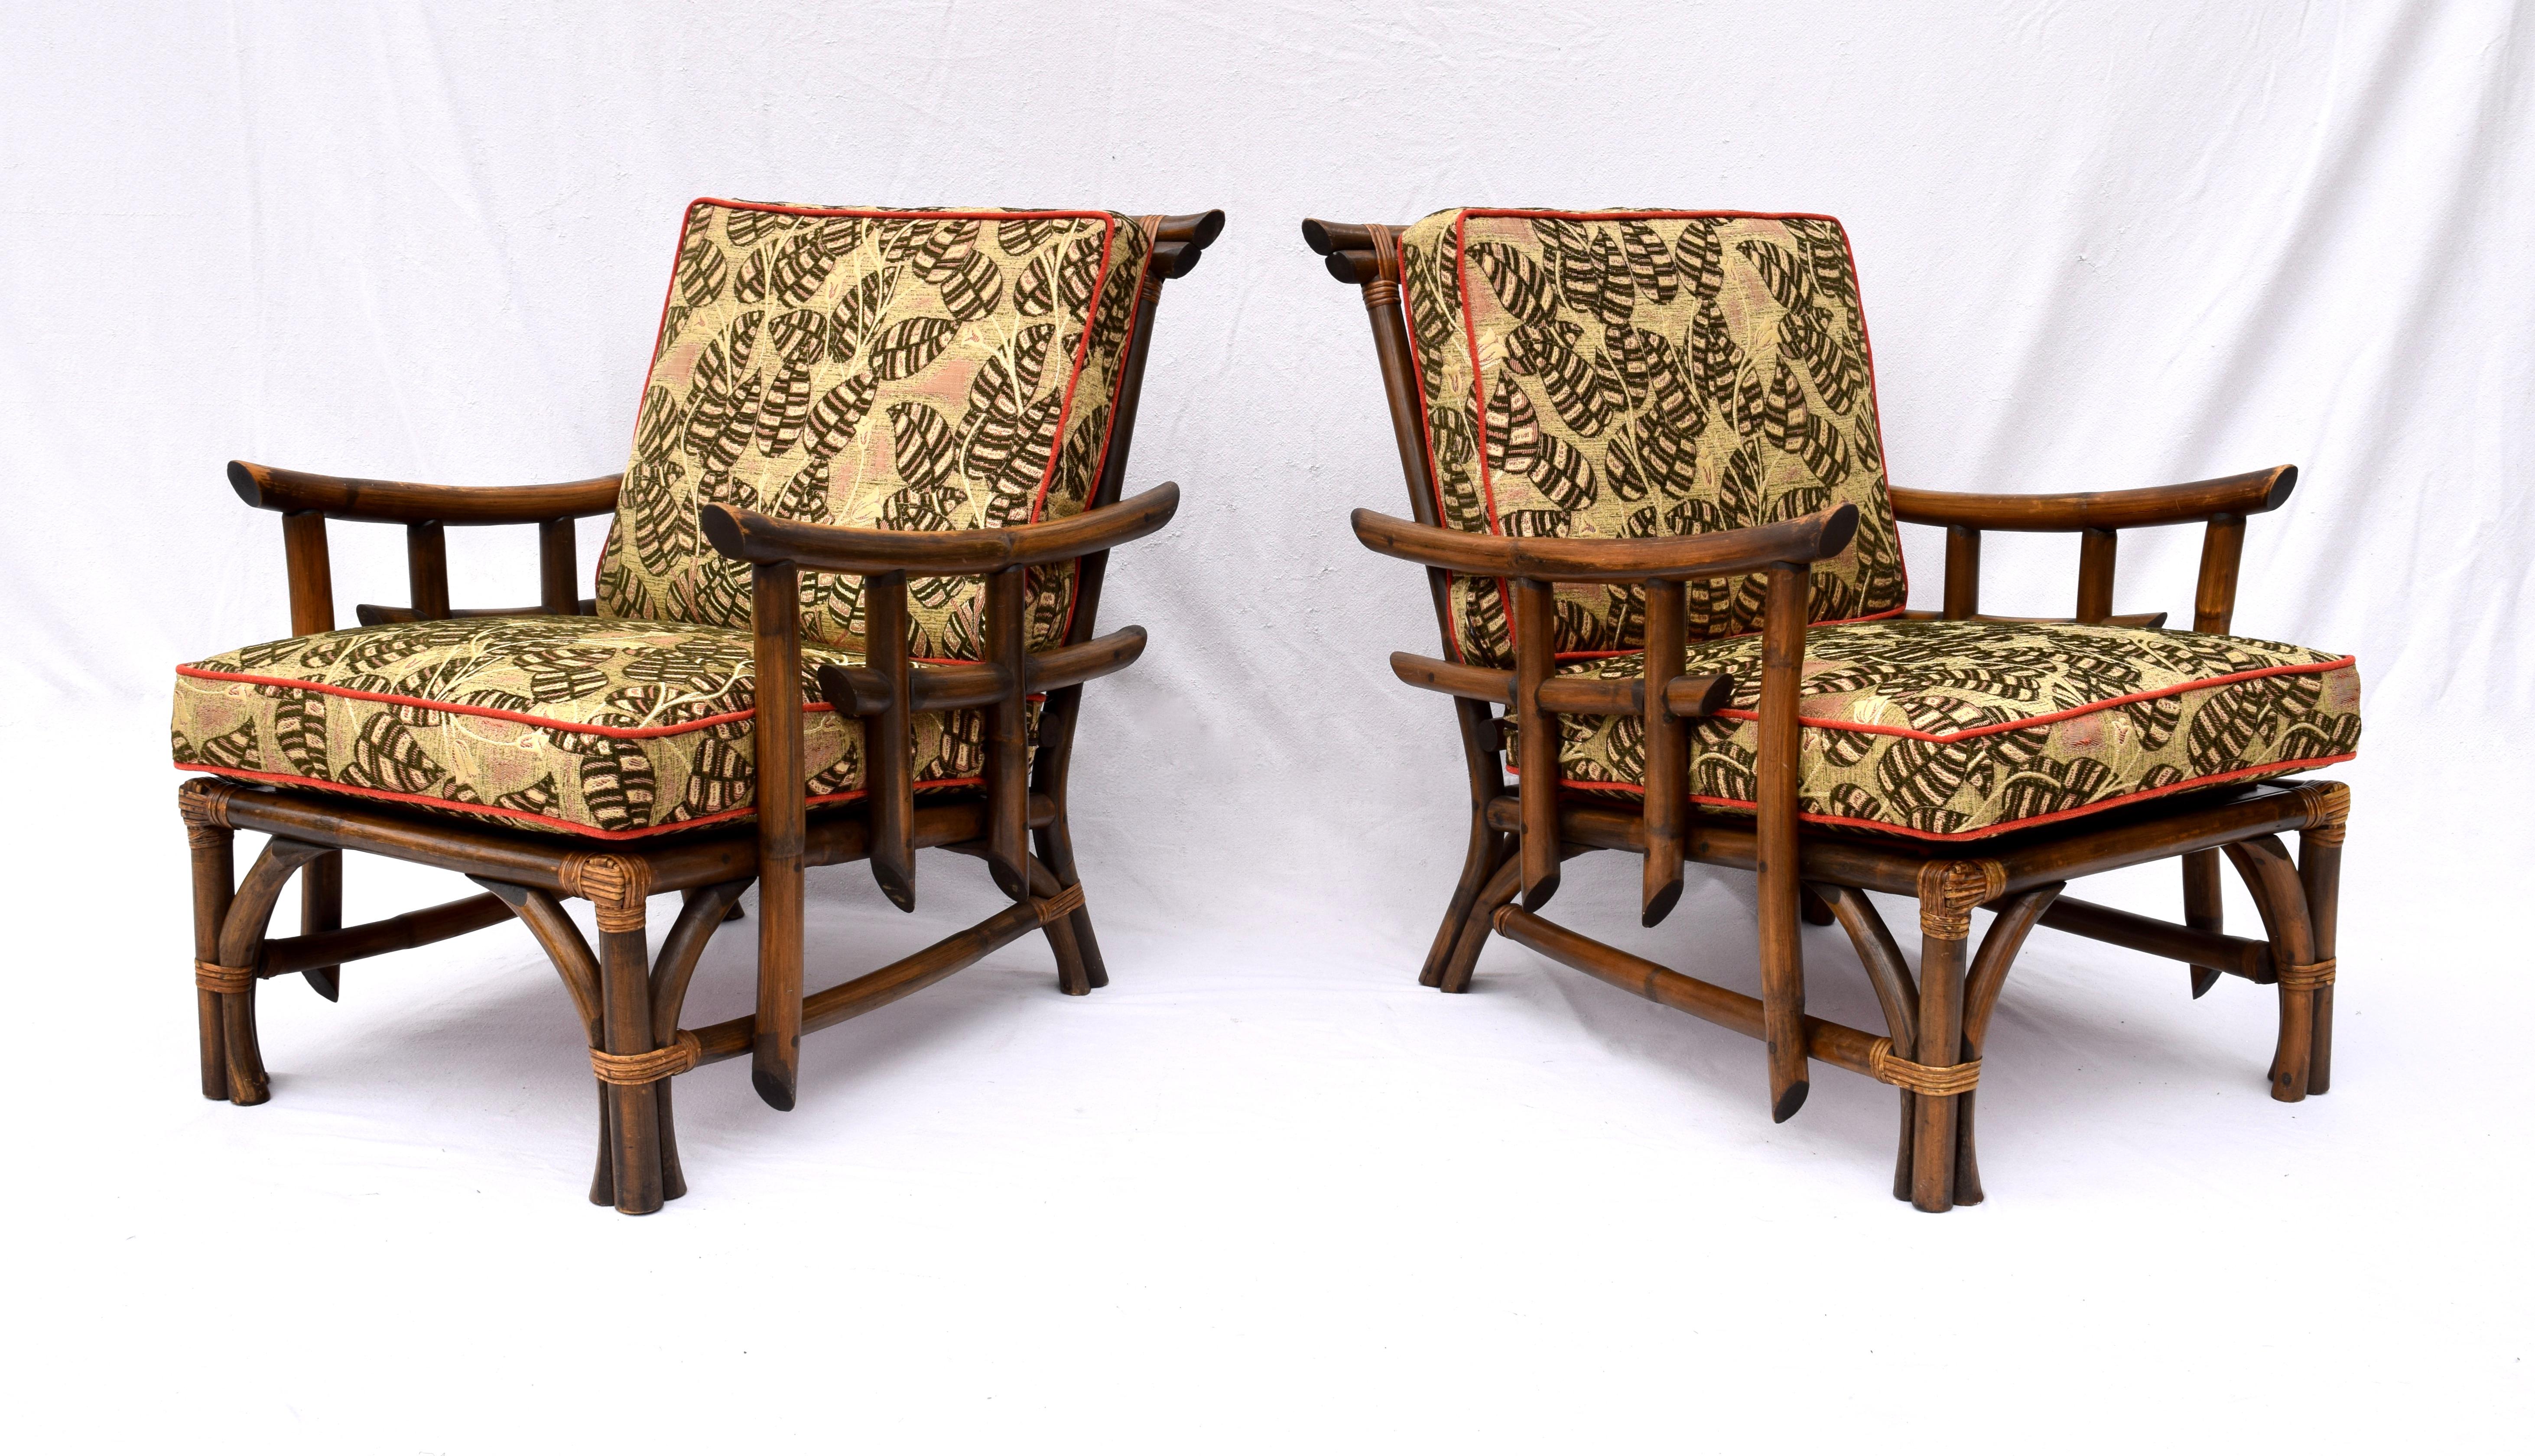 Chinoiserie Pagoda Rattan Chairs Ottoman Set In The Manner of John Wisner Ficks Reed